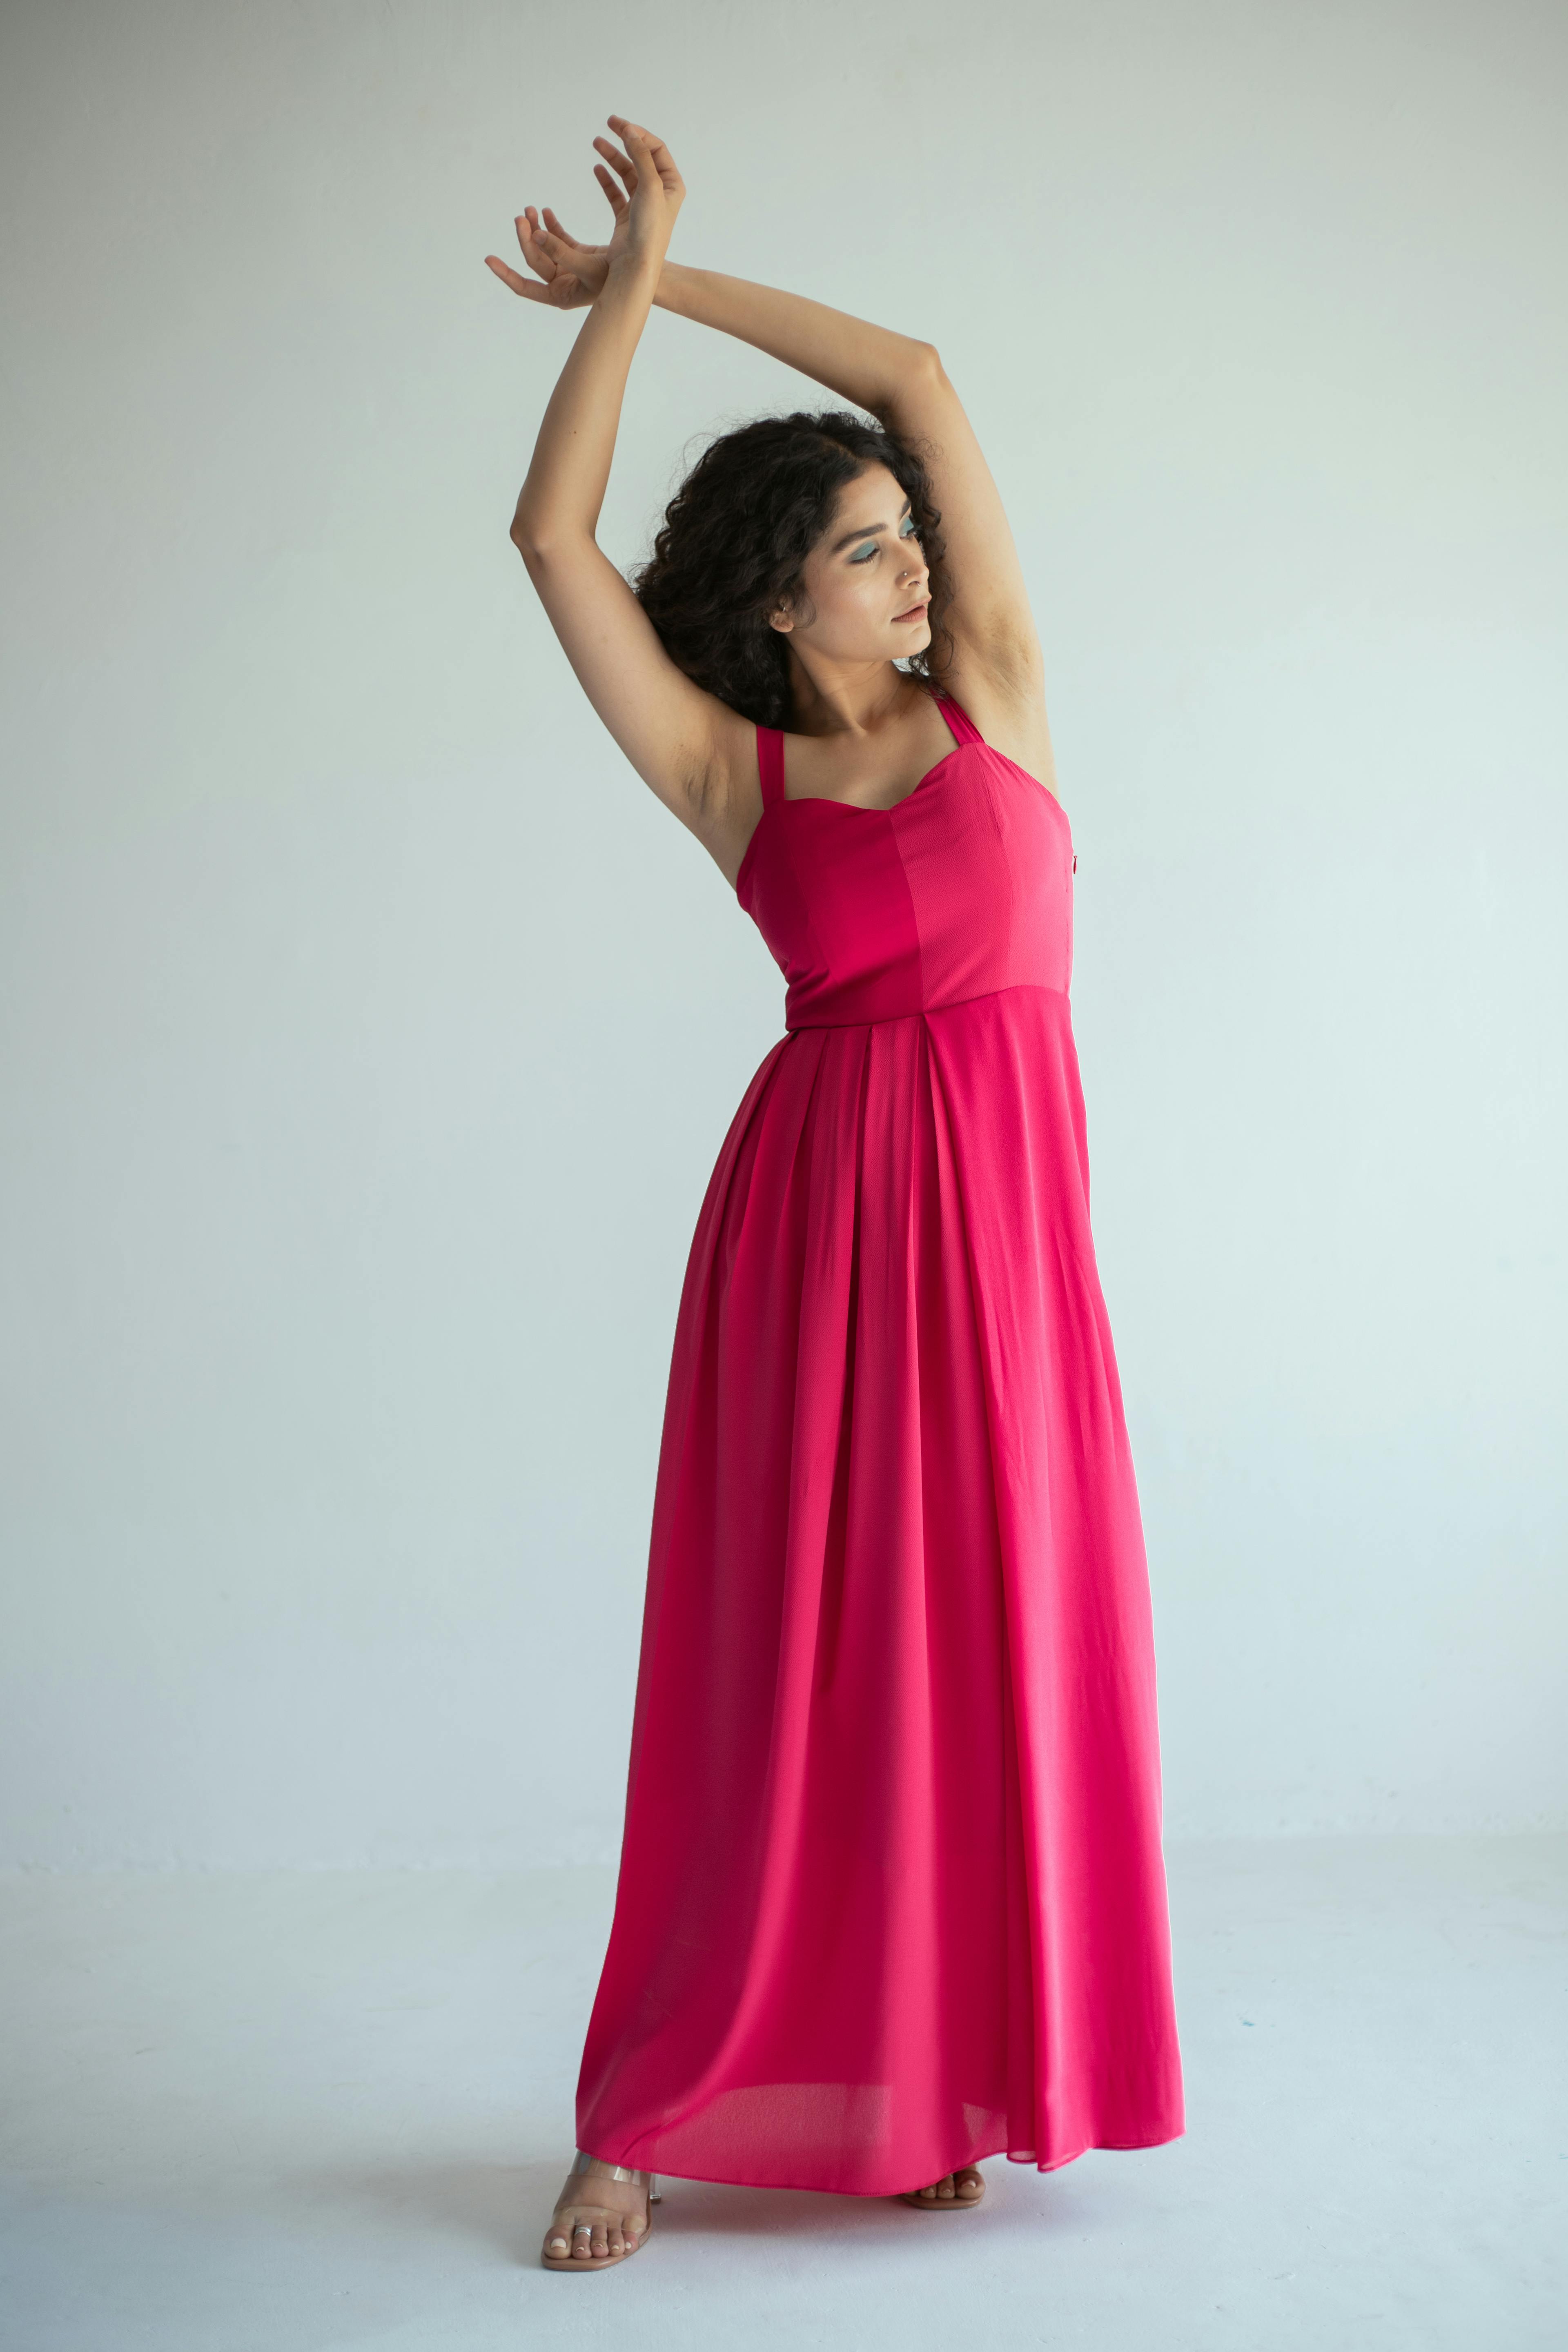 Thumbnail preview #3 for Dual Toned Pink Maxi Dress 